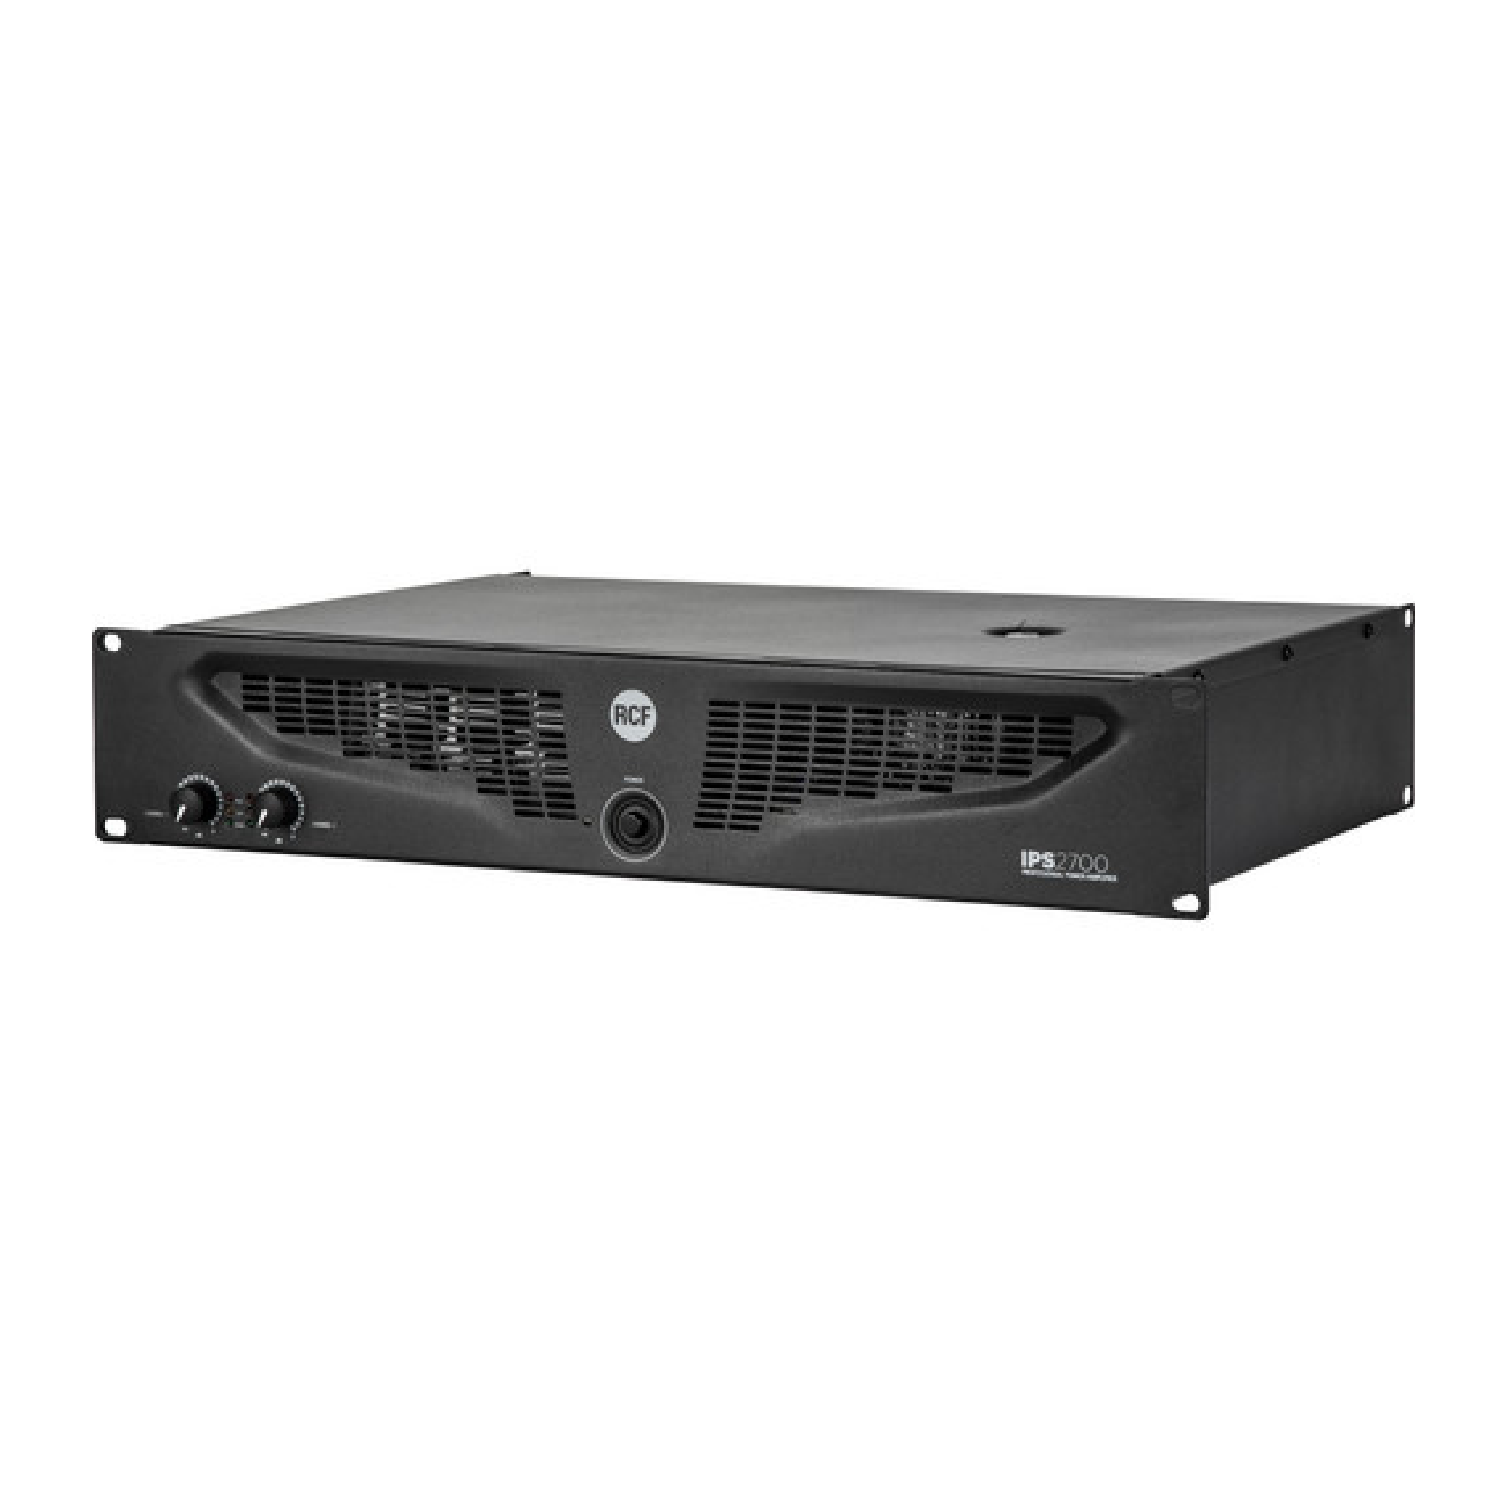 Class H Power Amplifiers - 2 x 1050 W RMS @ 4 ohm   IPS 2700 rcf